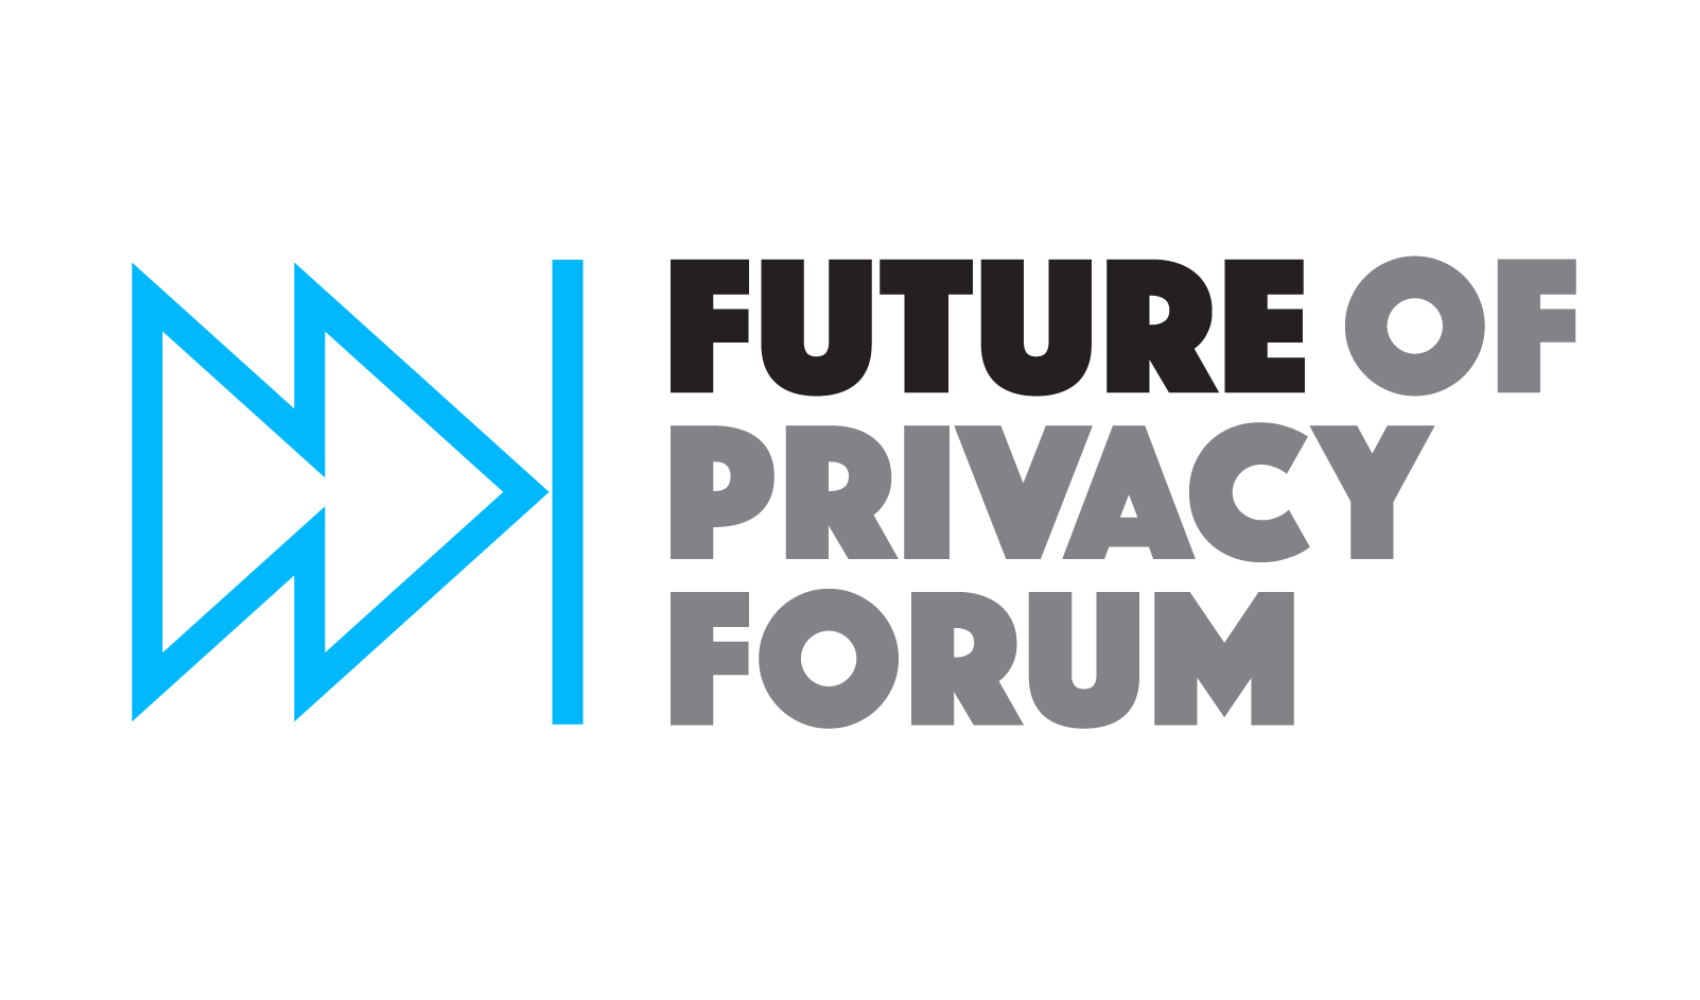 FPF at CPDP 2023: Covering Hot Topics, from Data Protection by